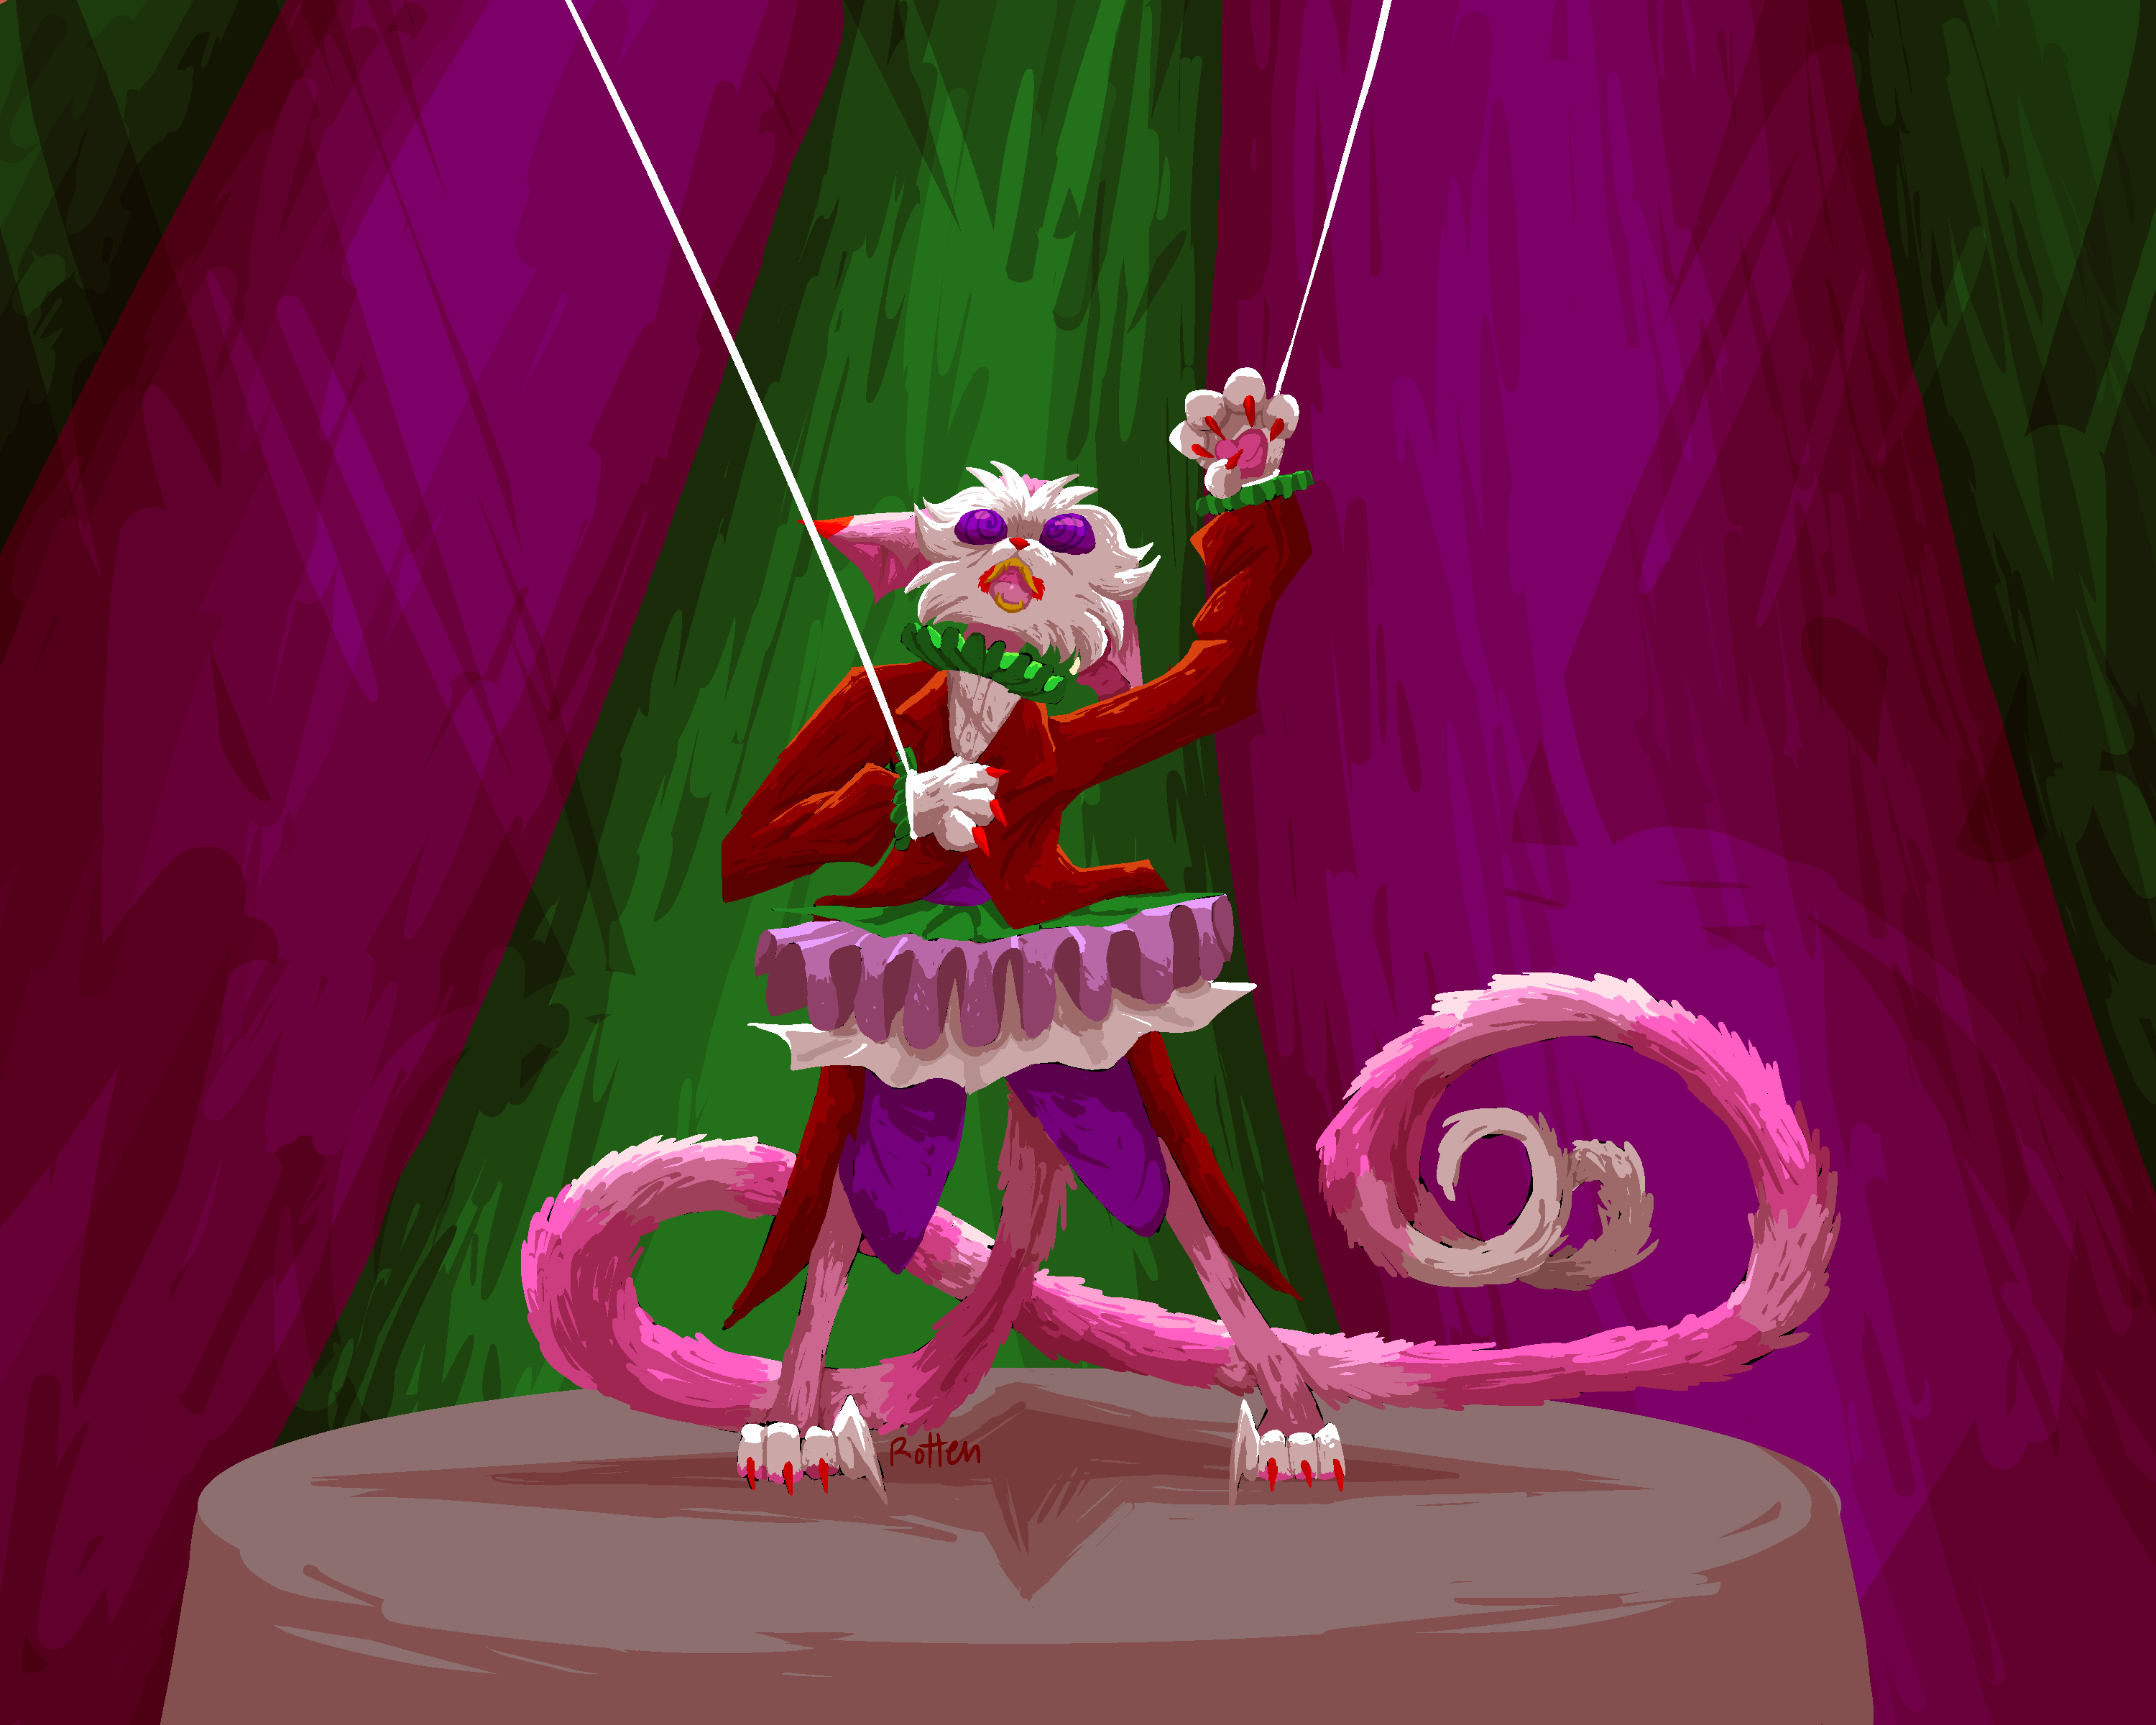 a digital drawing of a pink creature on two legs in a clown outfit. one arm is stretched upward and strings are attatched tied to its wrists. it looks distressed. it has spiral eyes and its tail is forked. the background is a circus tent.